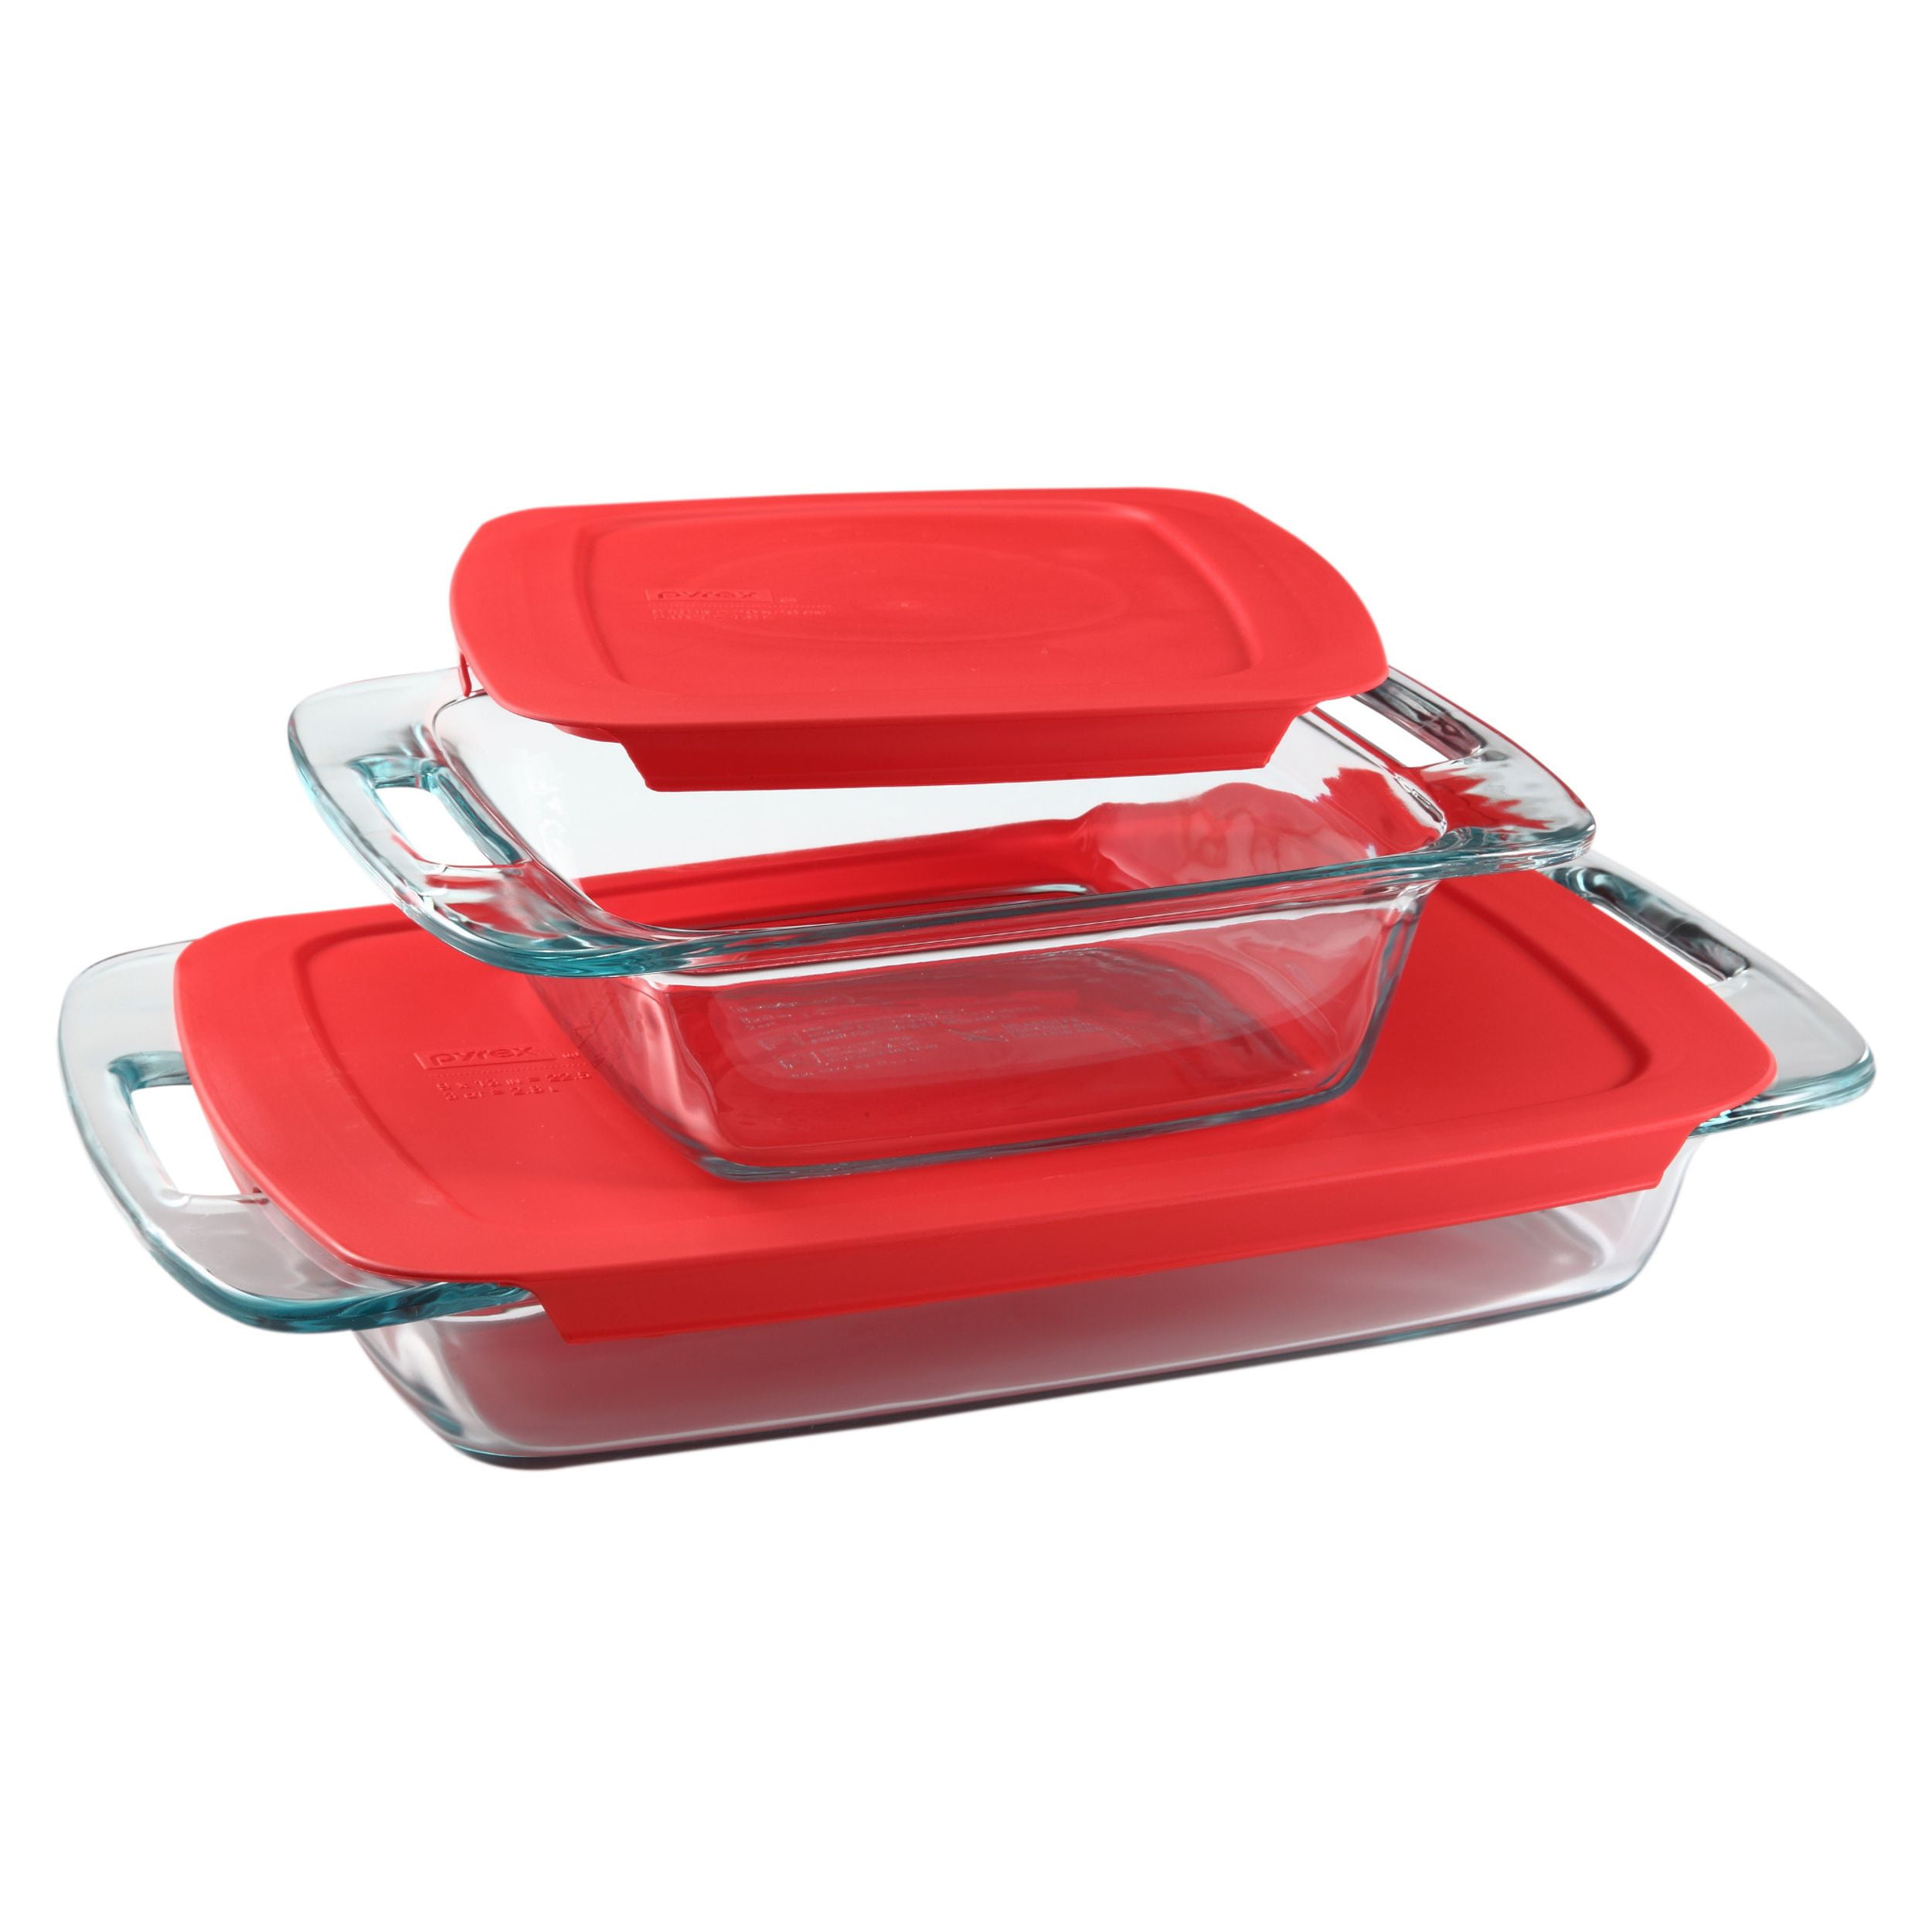 Pyrex Easy Grab 4-piece Glass Bakeware Set with Red Lids